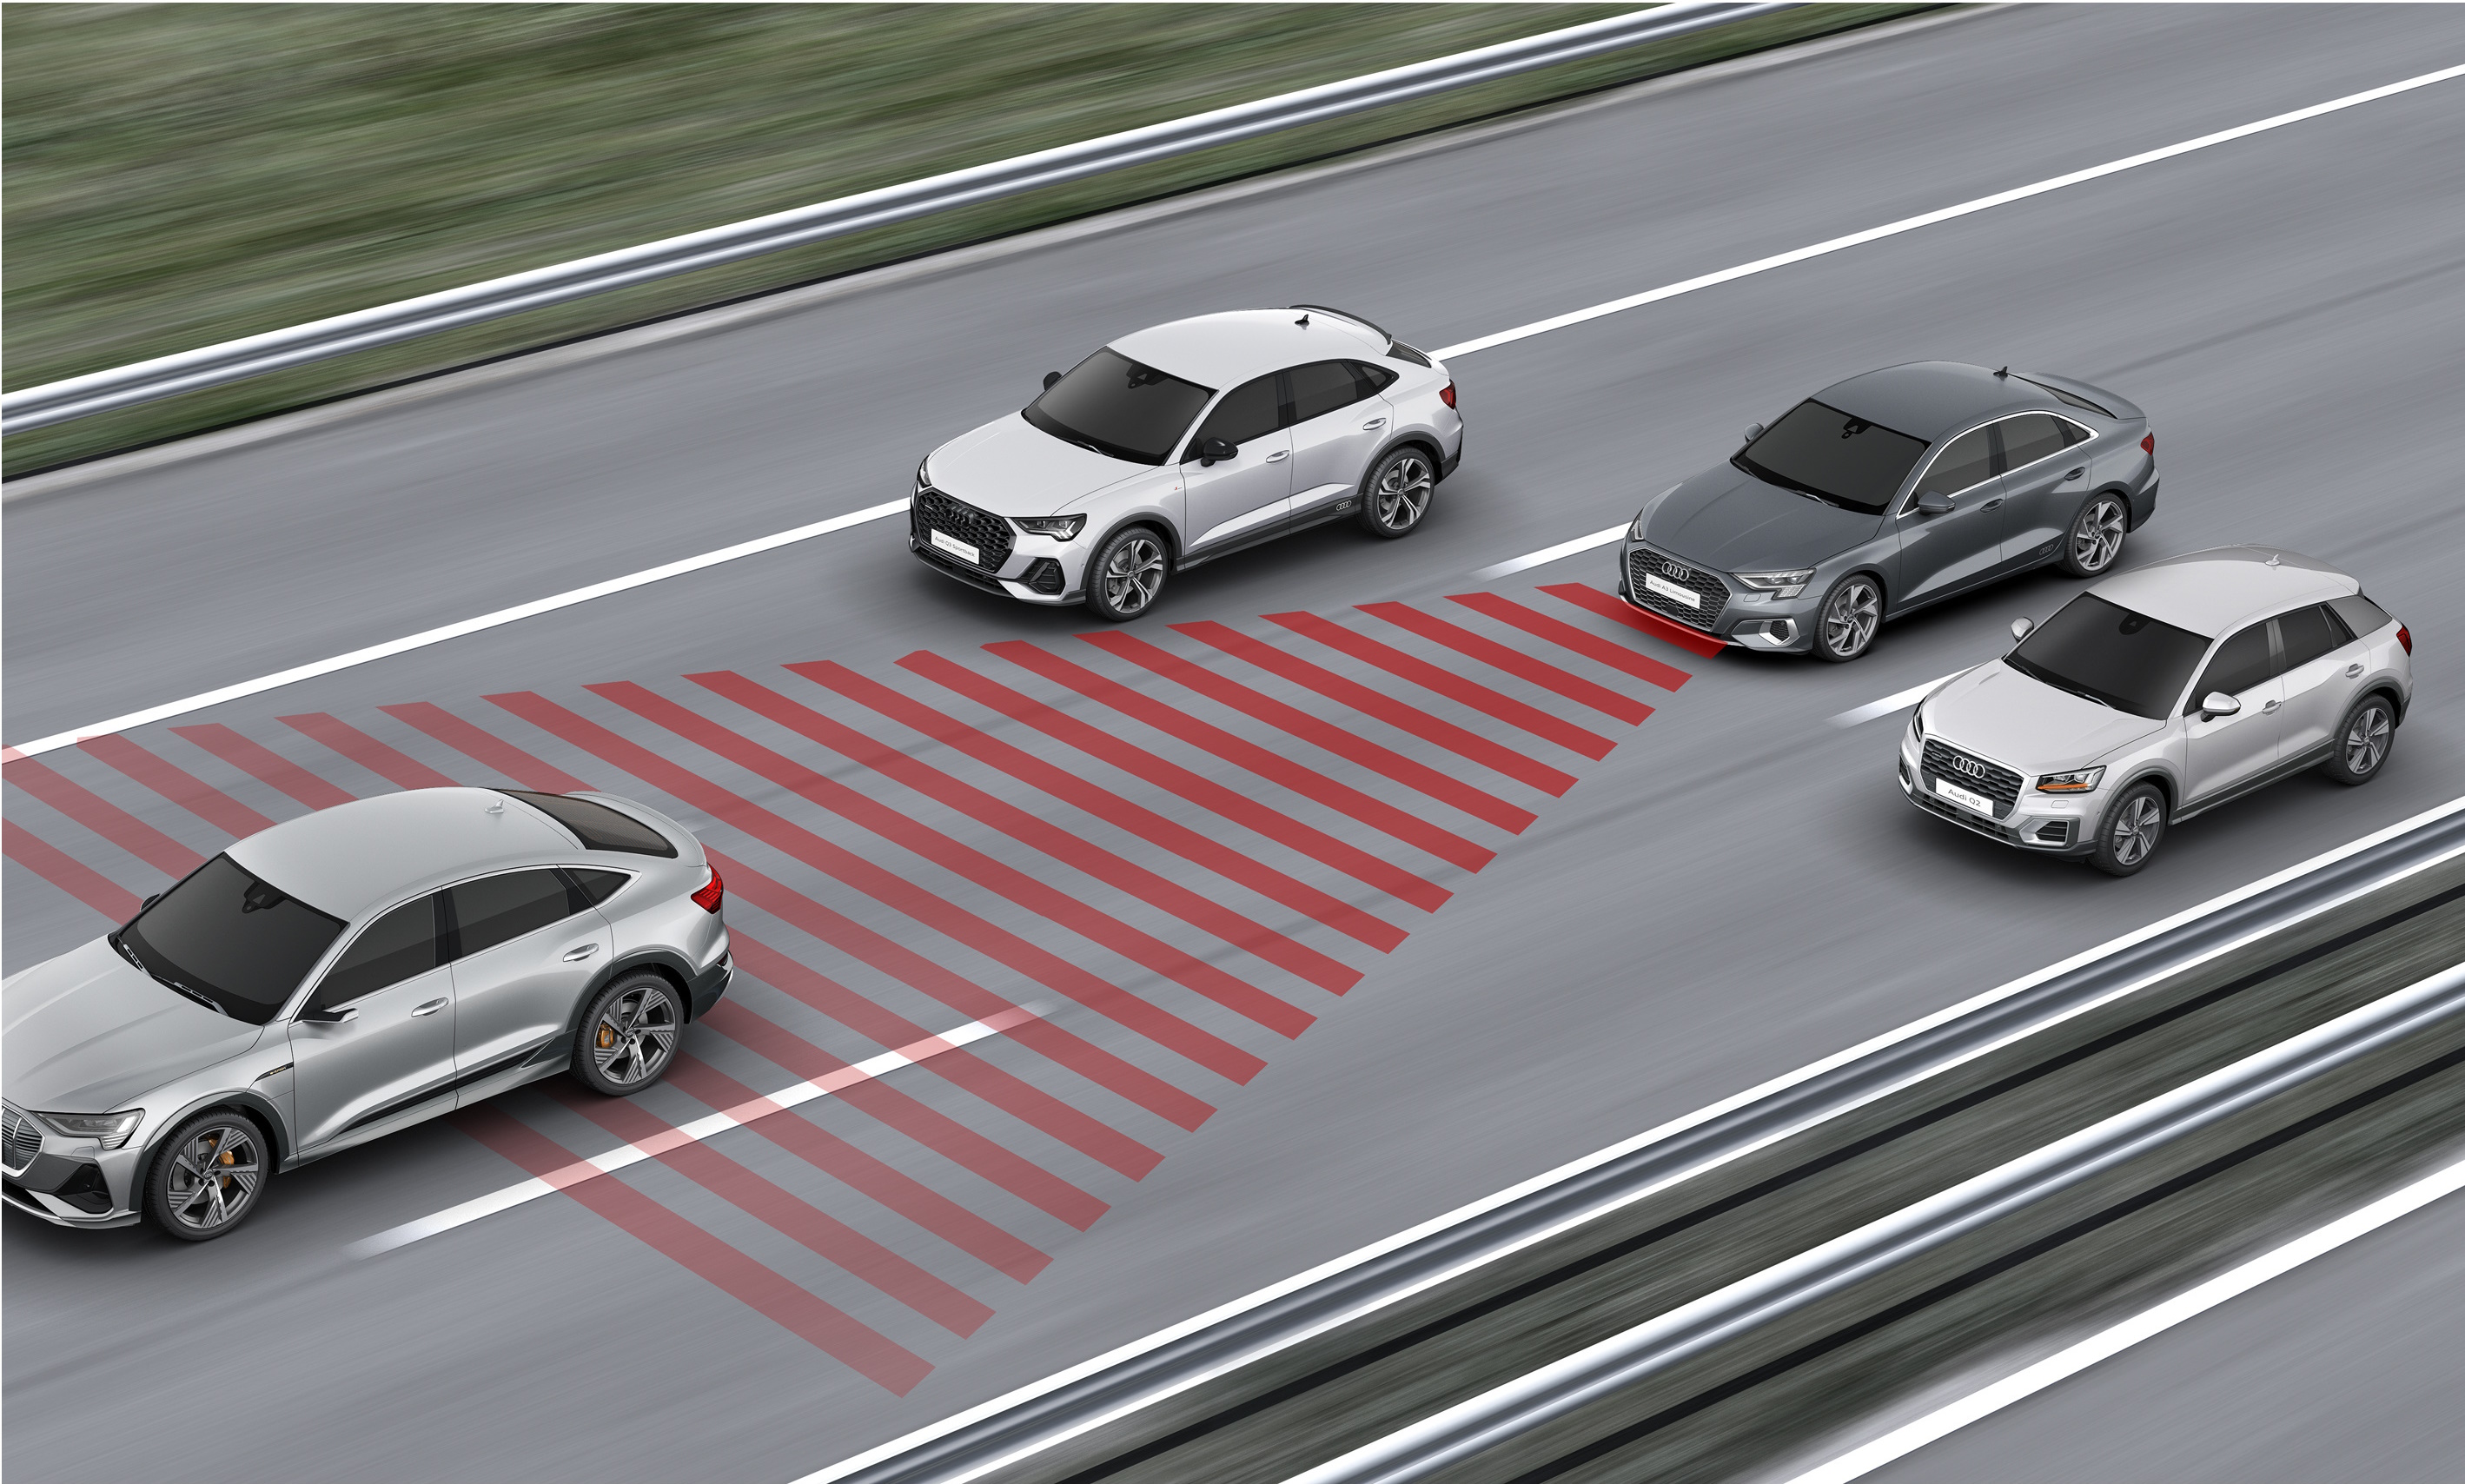 adaptive cruise control overtaking on the right